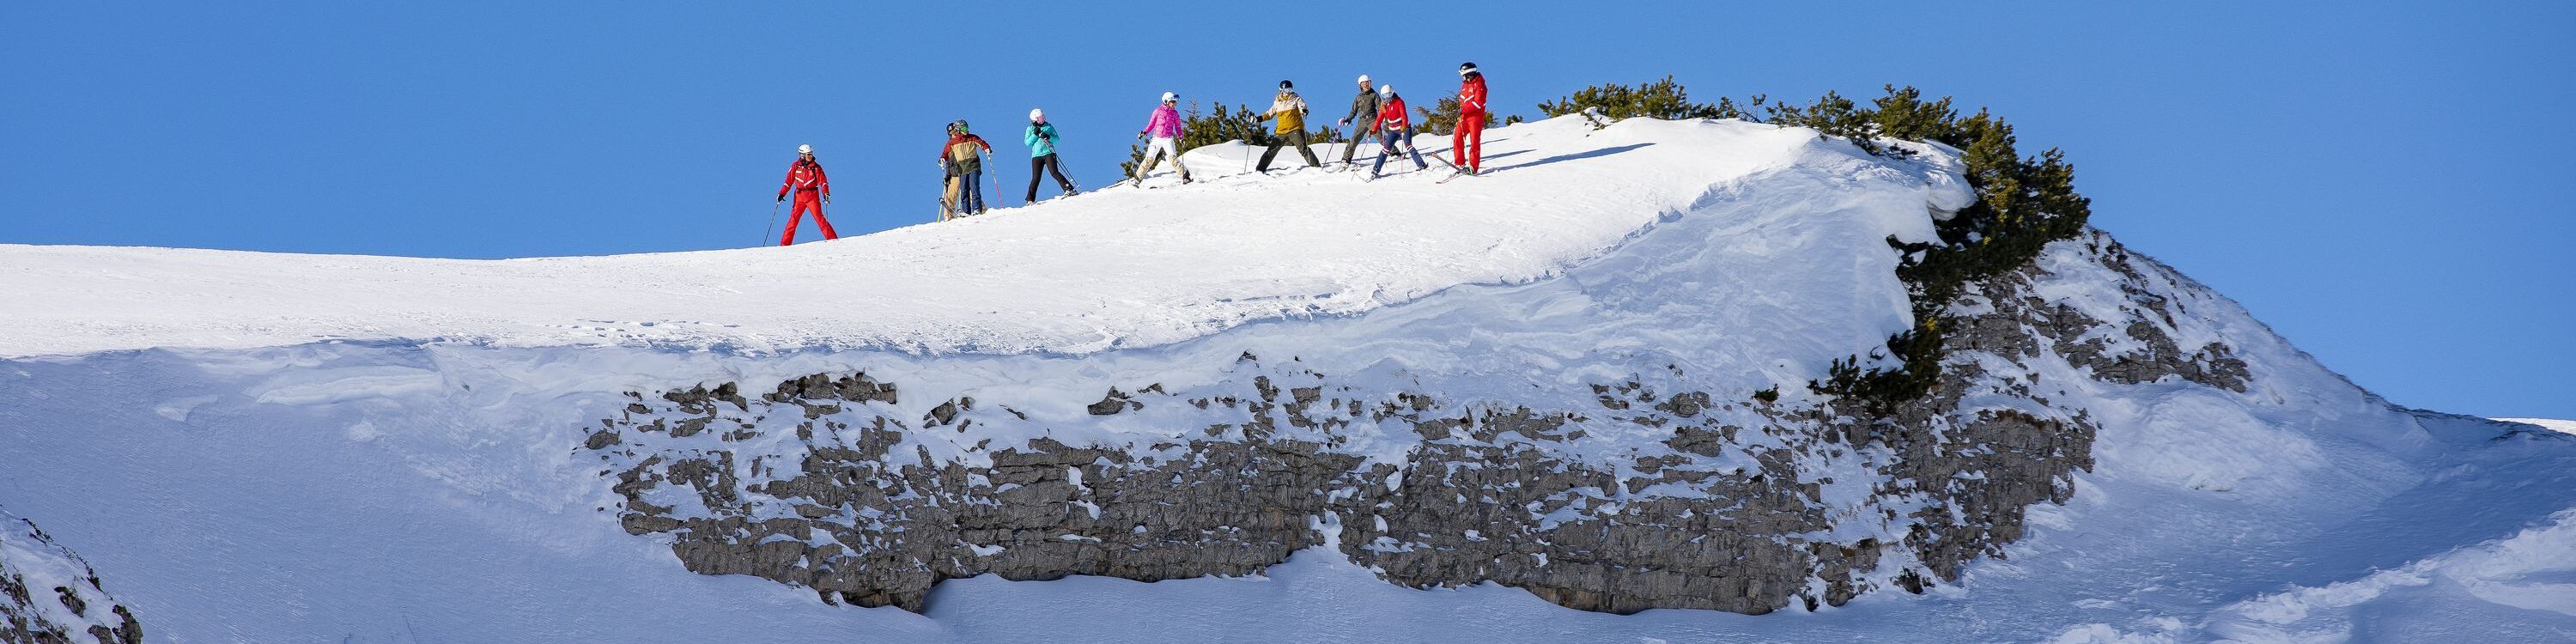 Group skiing course at the Ifen for adults